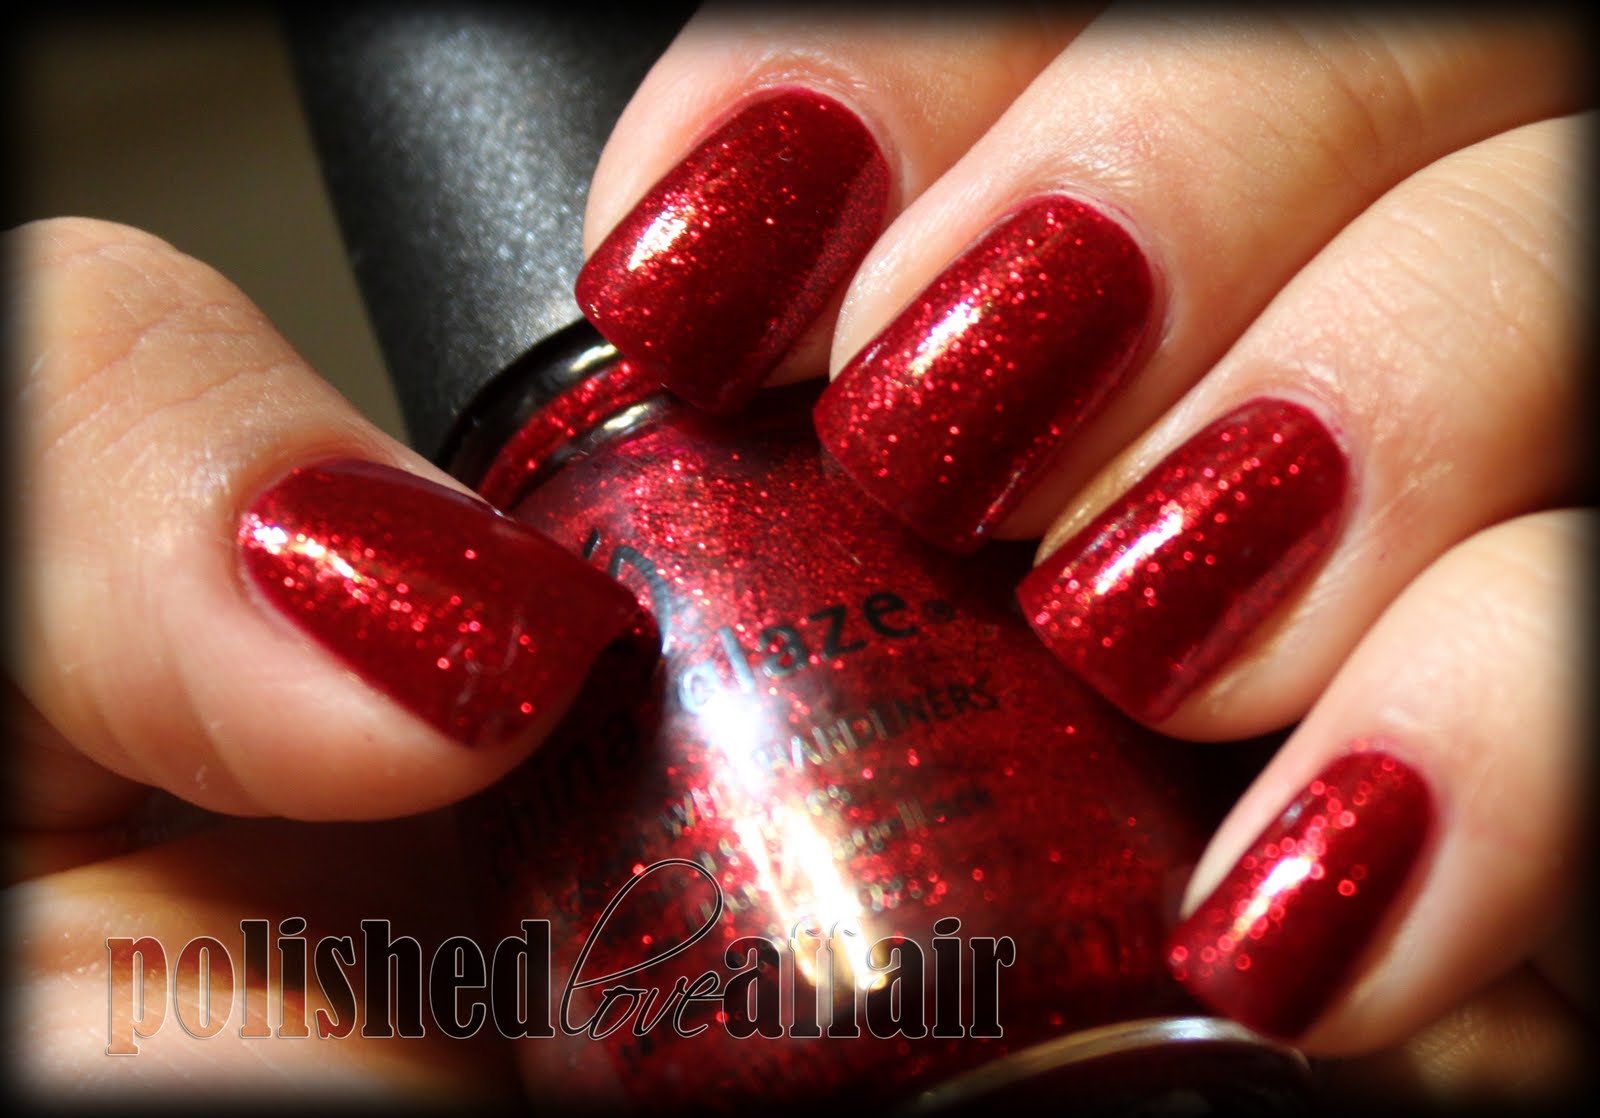 4. China Glaze Nail Lacquer in "Ruby Pumps" - wide 7